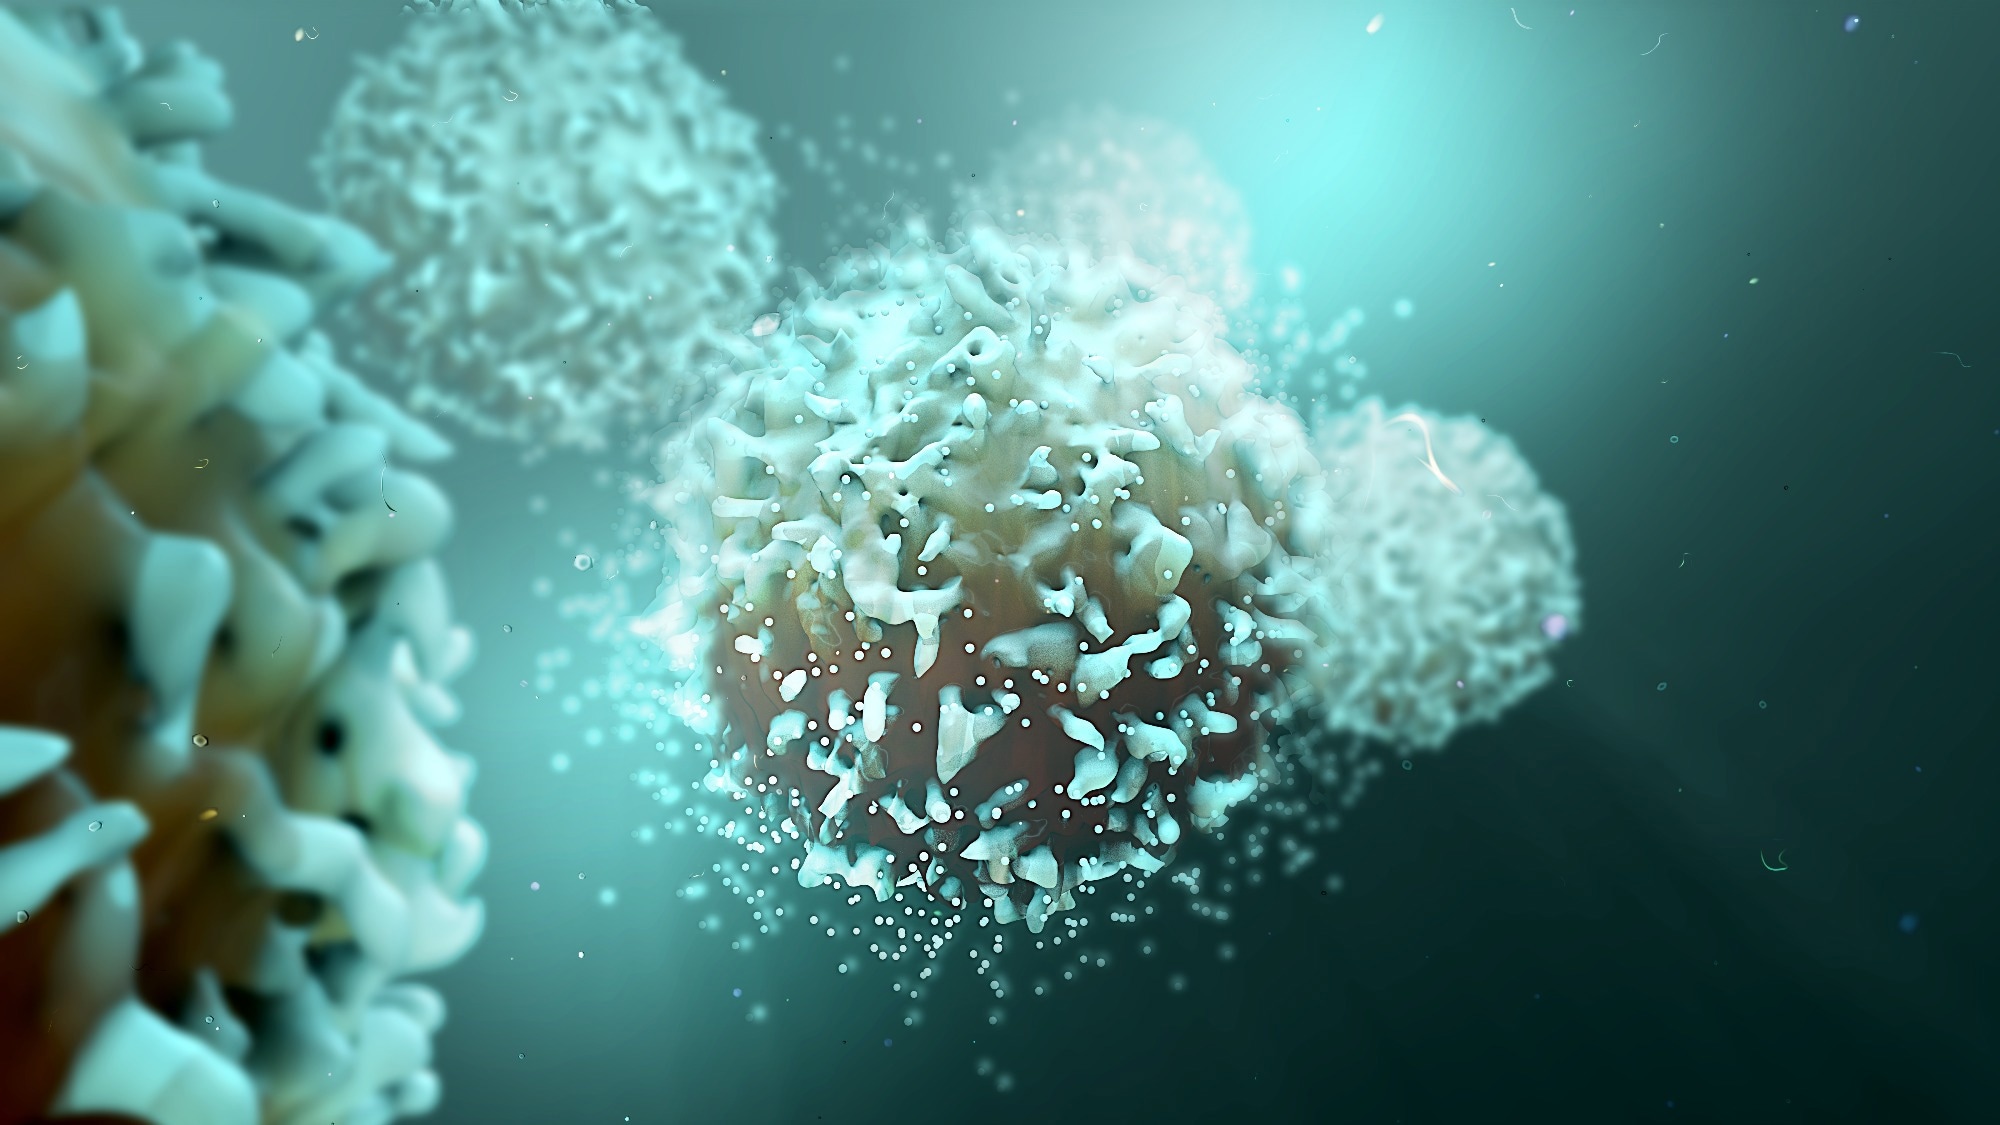 Study: Robust T cell responses to Pfizer/BioNTech vaccine compared to infection and evidence of attenuated peripheral CD8+ T cell responses due to COVID-19. Image Credit: Design_Cells / Shutterstock